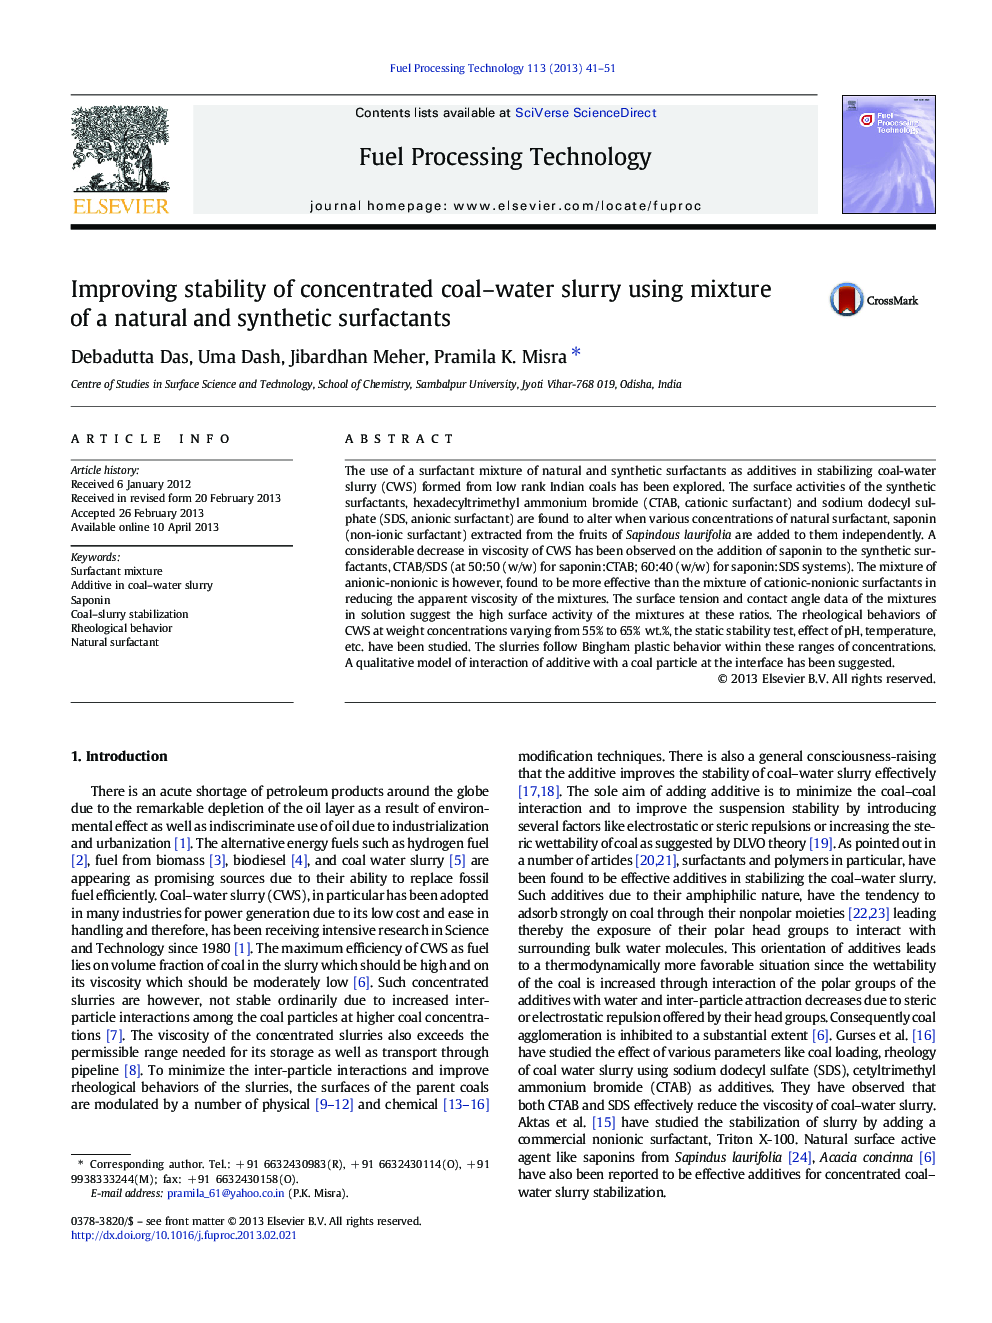 Improving stability of concentrated coal–water slurry using mixture of a natural and synthetic surfactants